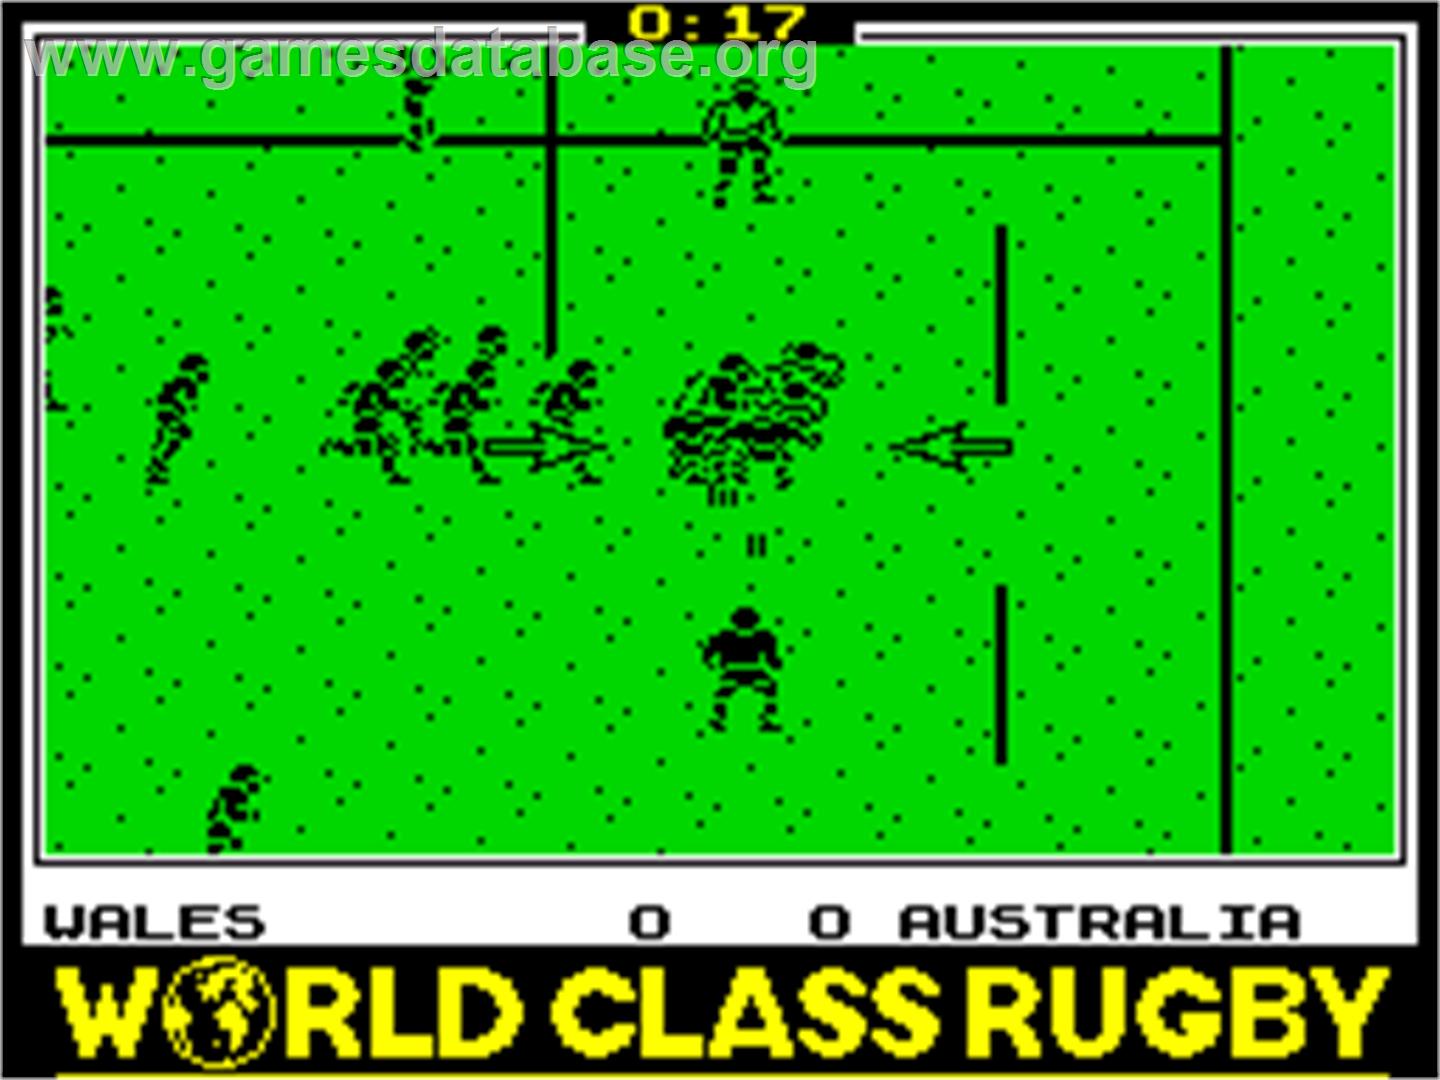 World Class Rugby - Sinclair ZX Spectrum - Artwork - In Game